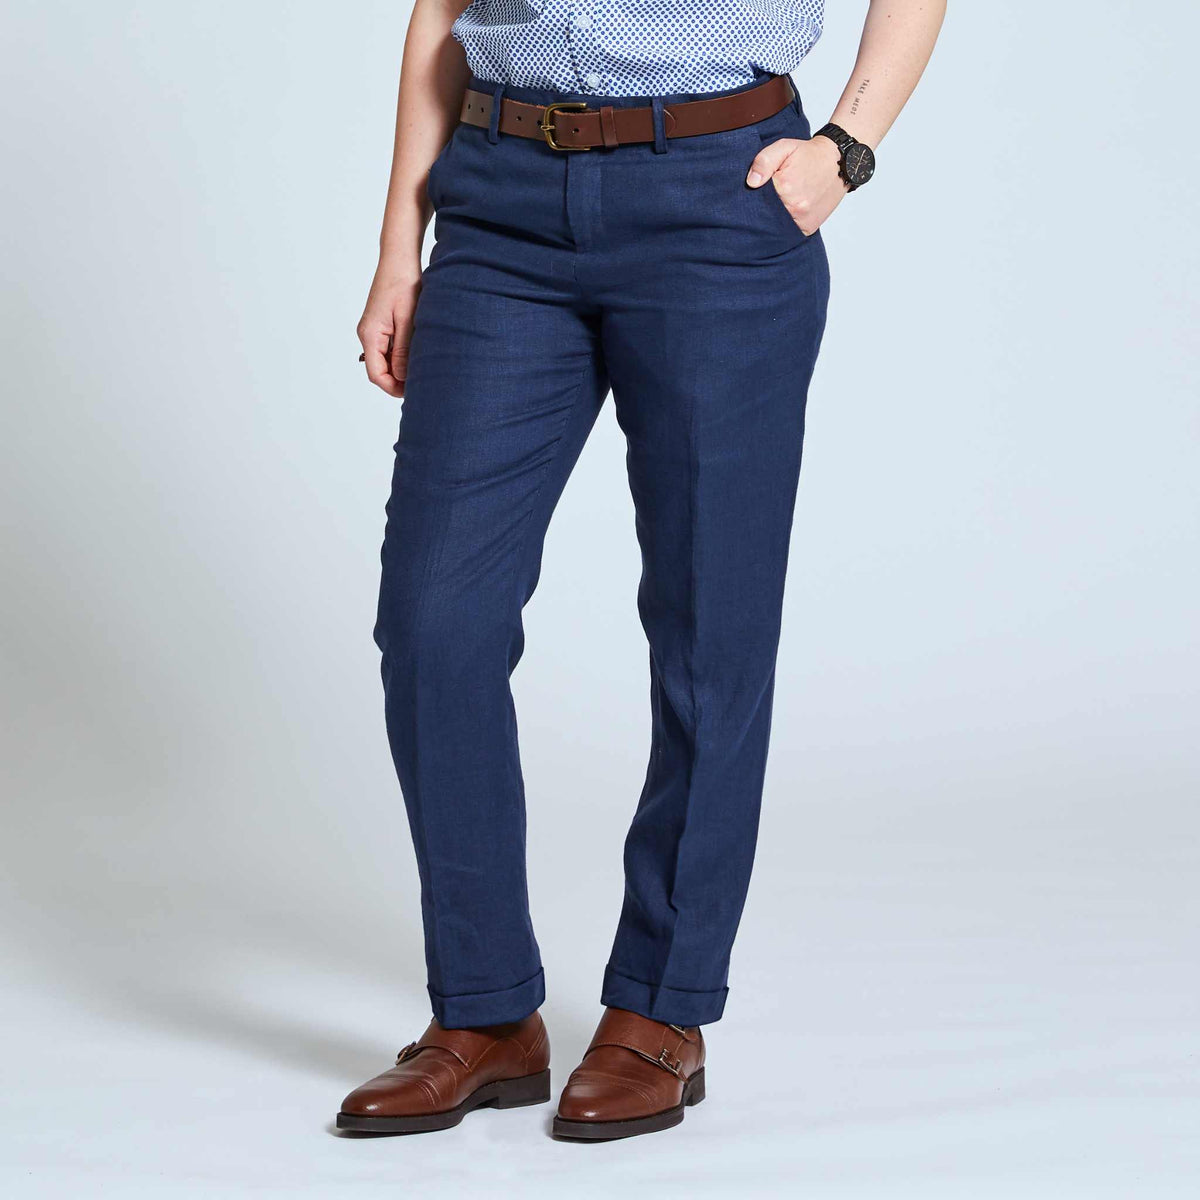 Men's Trousers - Buy Linen Trousers for Men Online with Upto 50